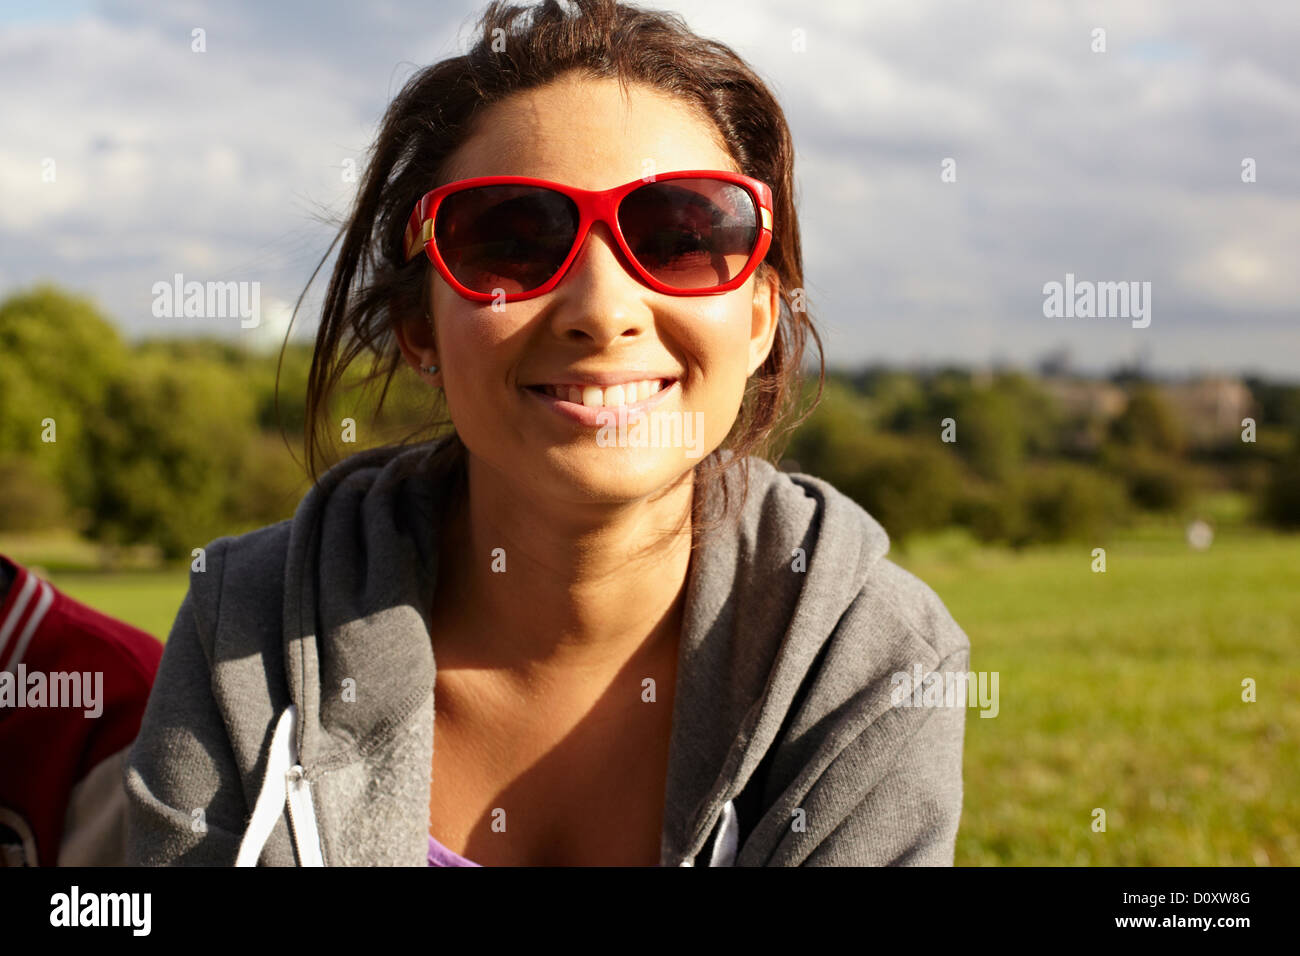 Teenage girl in sunglasses in the park Stock Photo